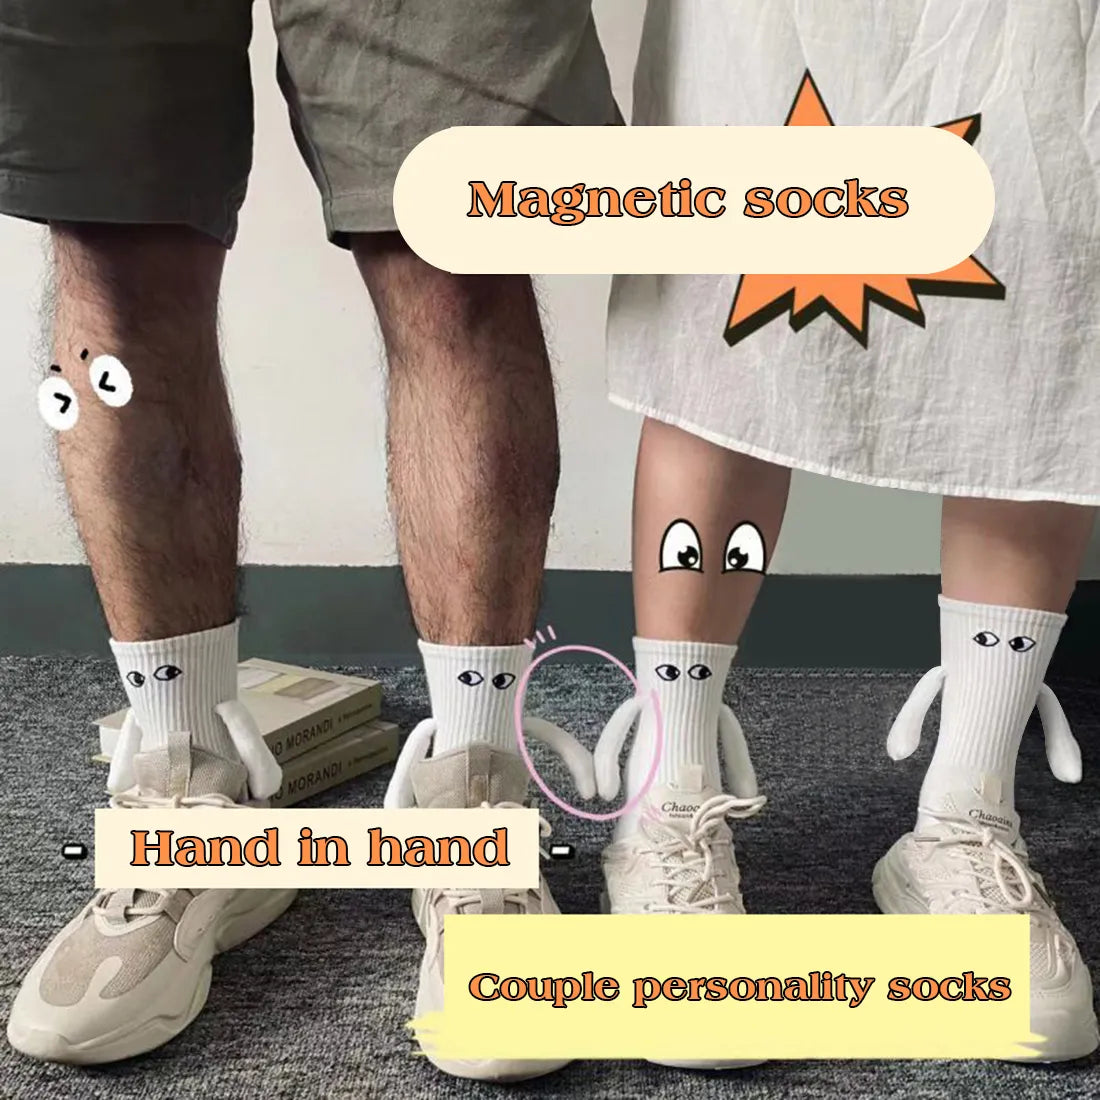 Magnetic Holding Hands Socks - Free Today Only